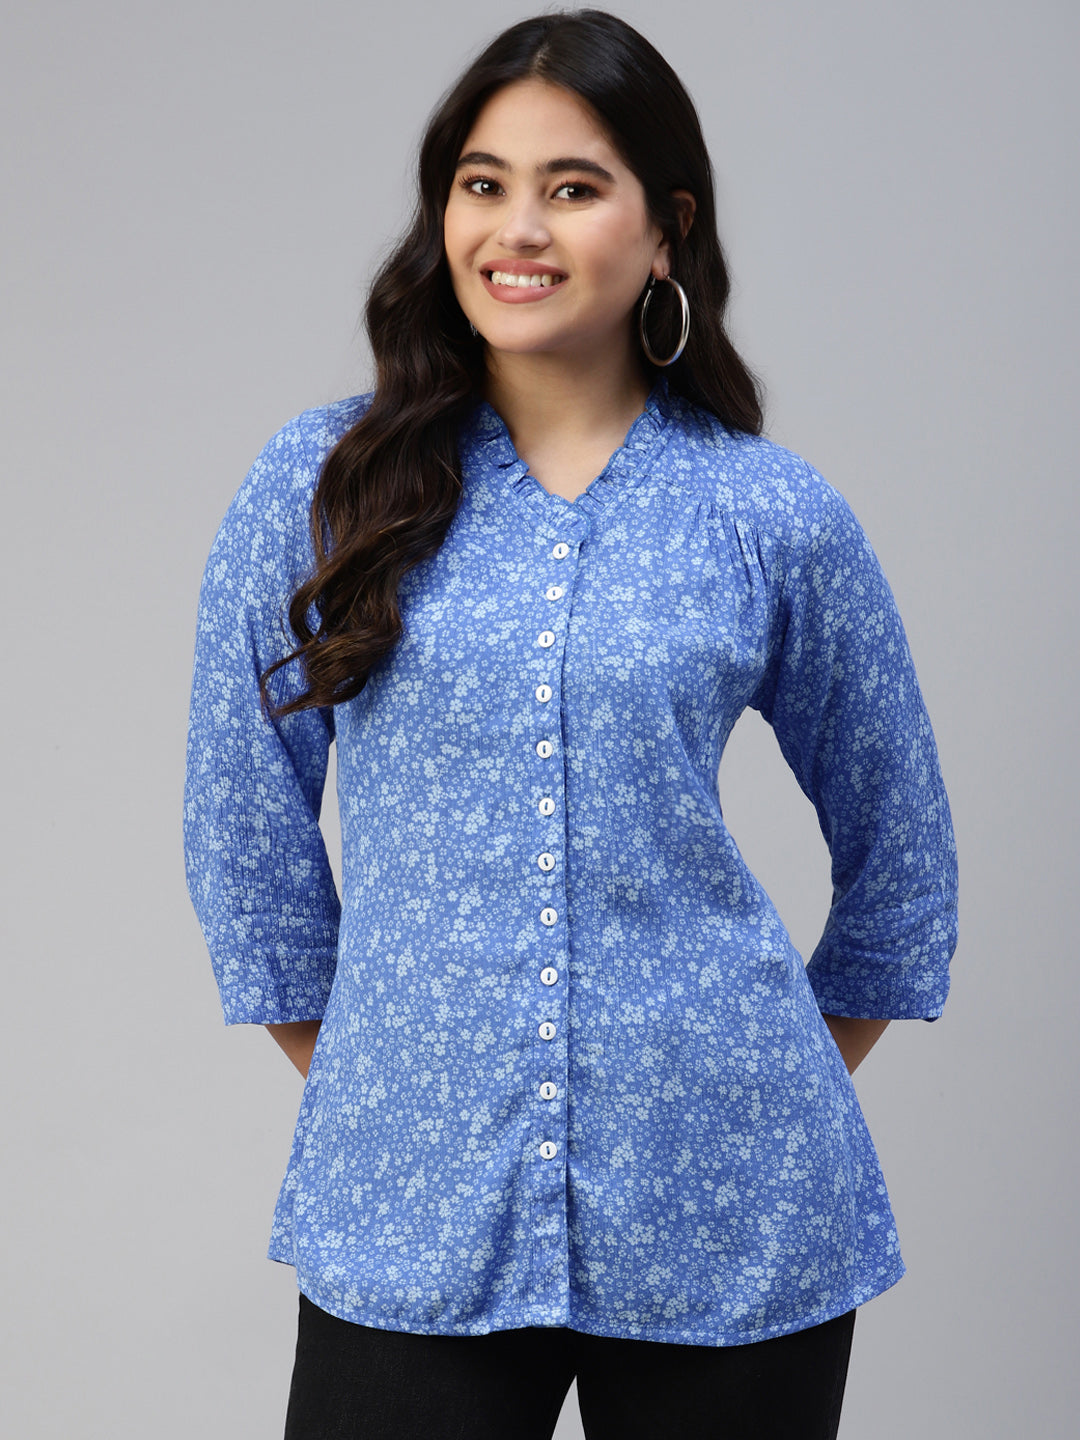 Ayaany Women All Purpose V Neck Frilled Blue Shirt